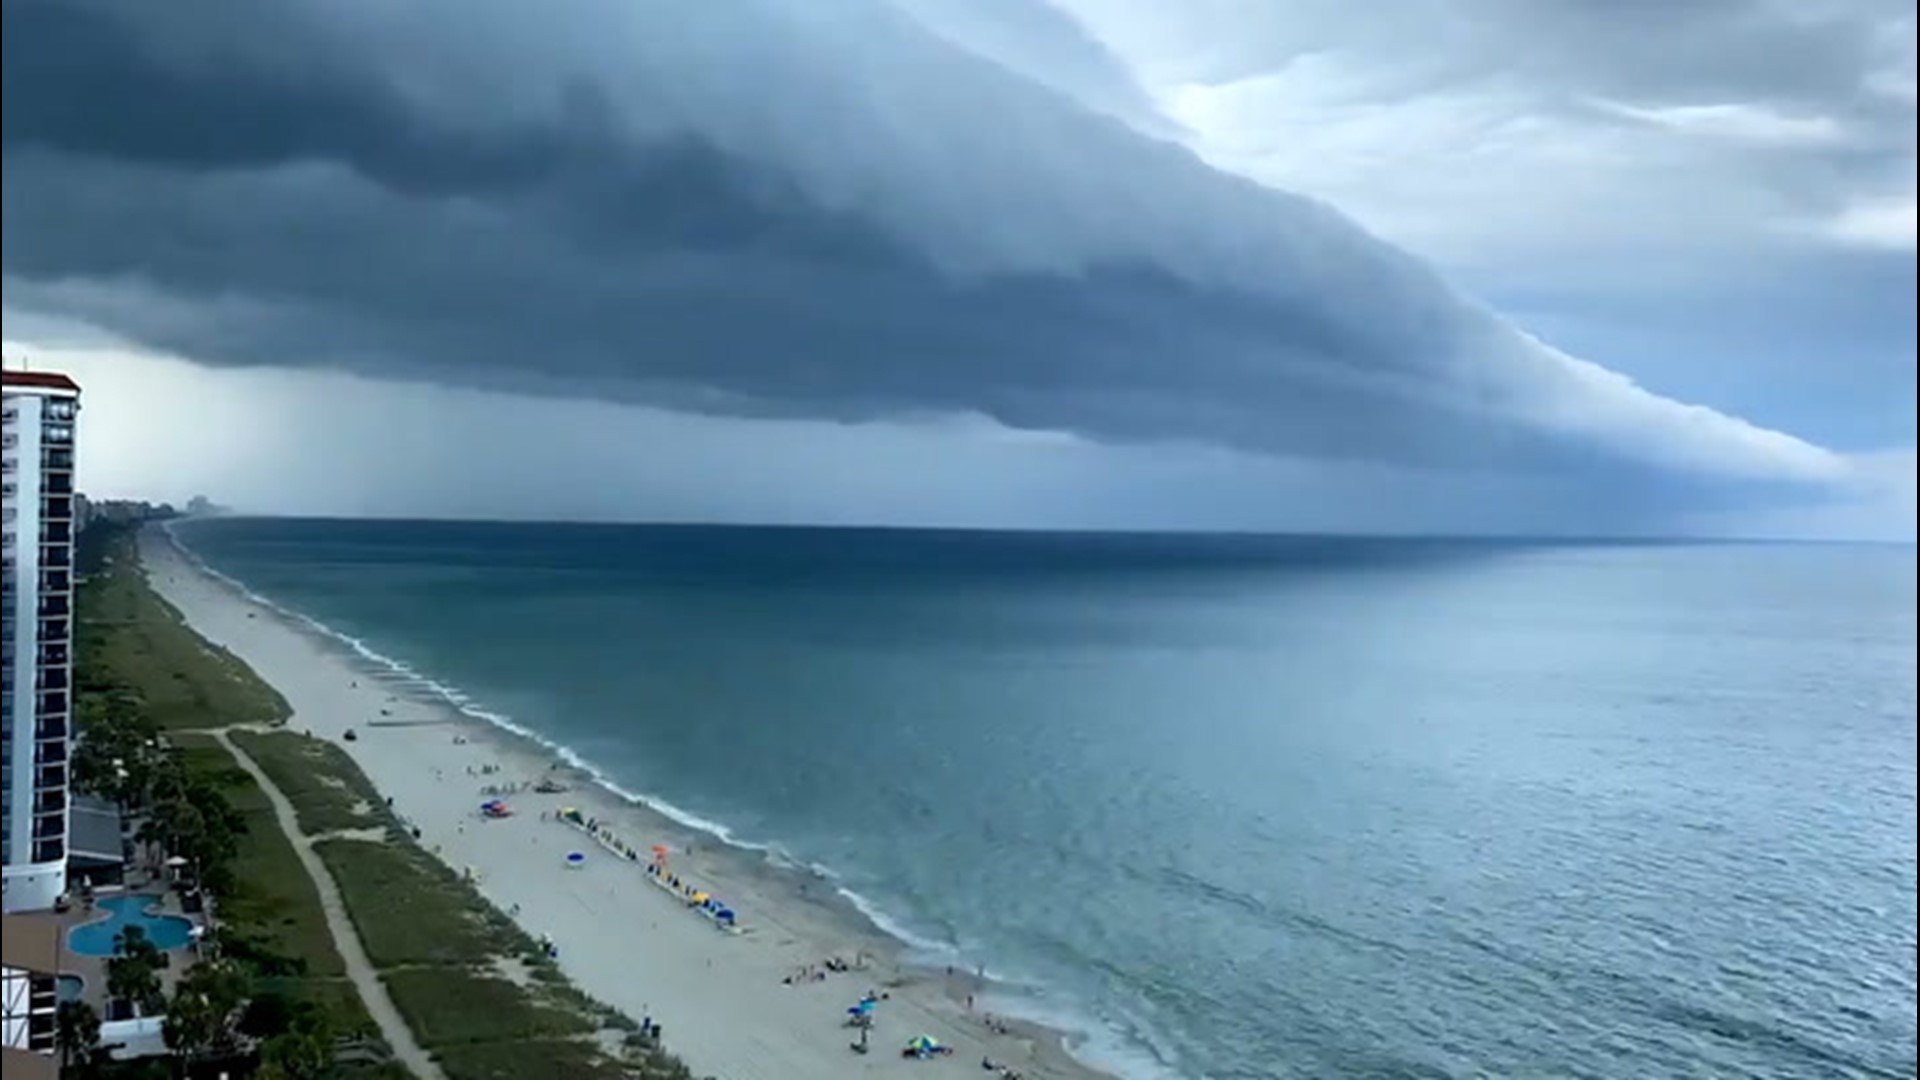 This time-lapse video shows a gust front on June 30 as it approached Myrtle Beach, South Carolina. Temperatures dropped as thunderstorms moved into the area.